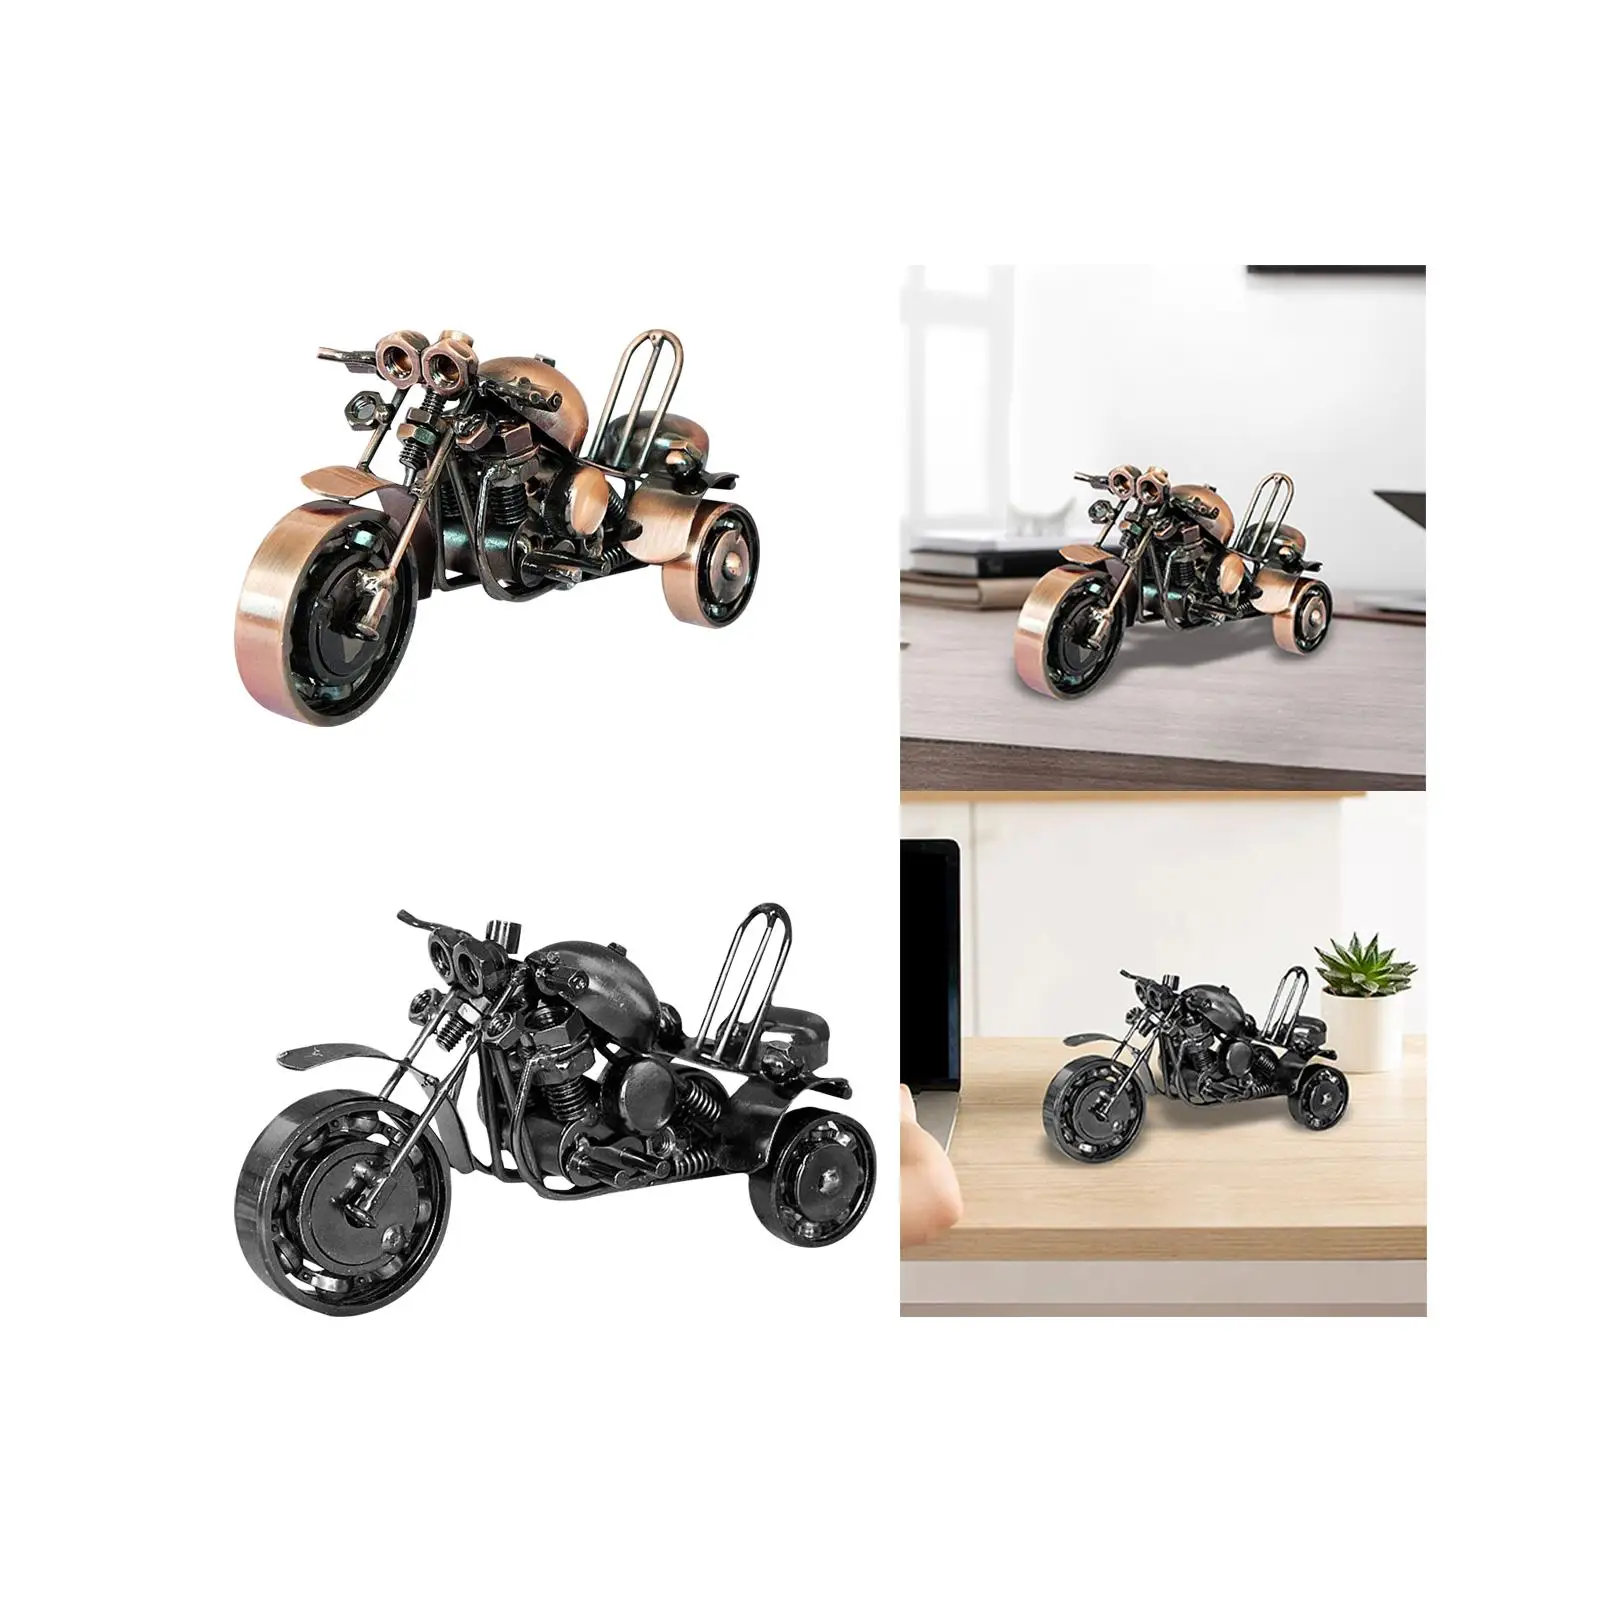 Metal Three Wheeled Motorcycle Figurine Statue Decoration for Birthday Gift